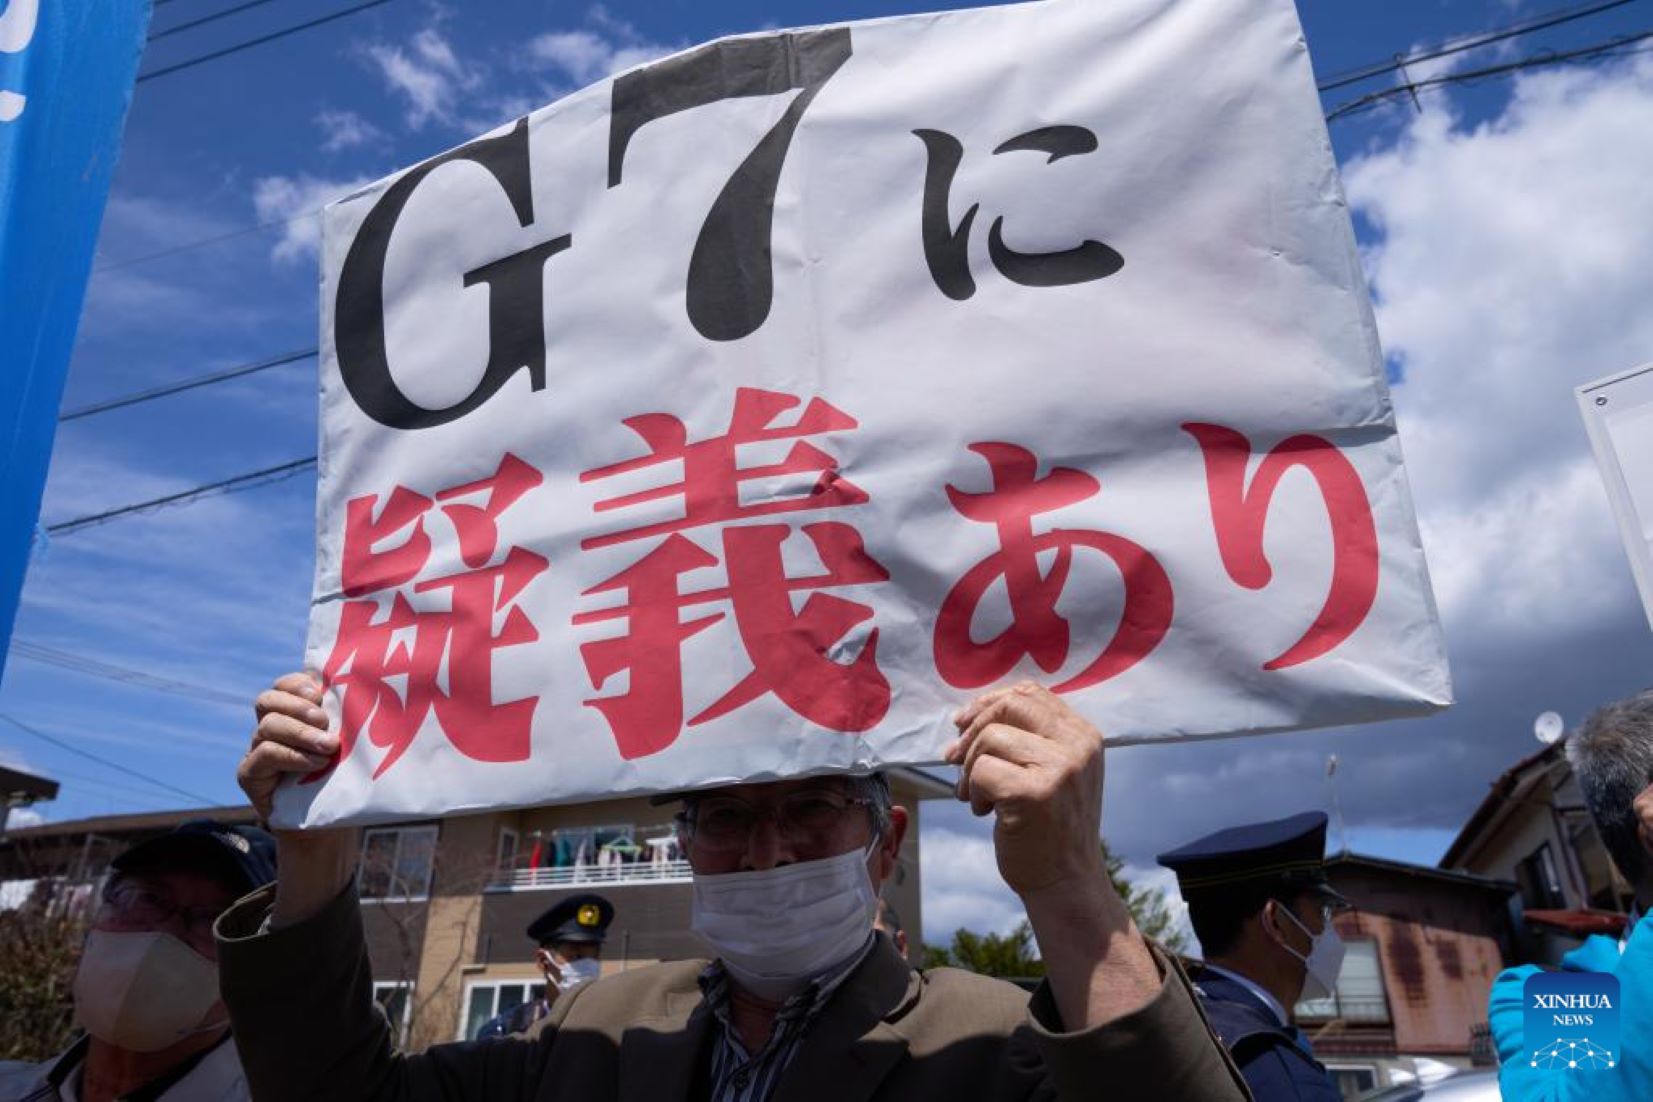 Japanese Citic Groups Protest Against Upcoming G7 Summit In Hiroshima